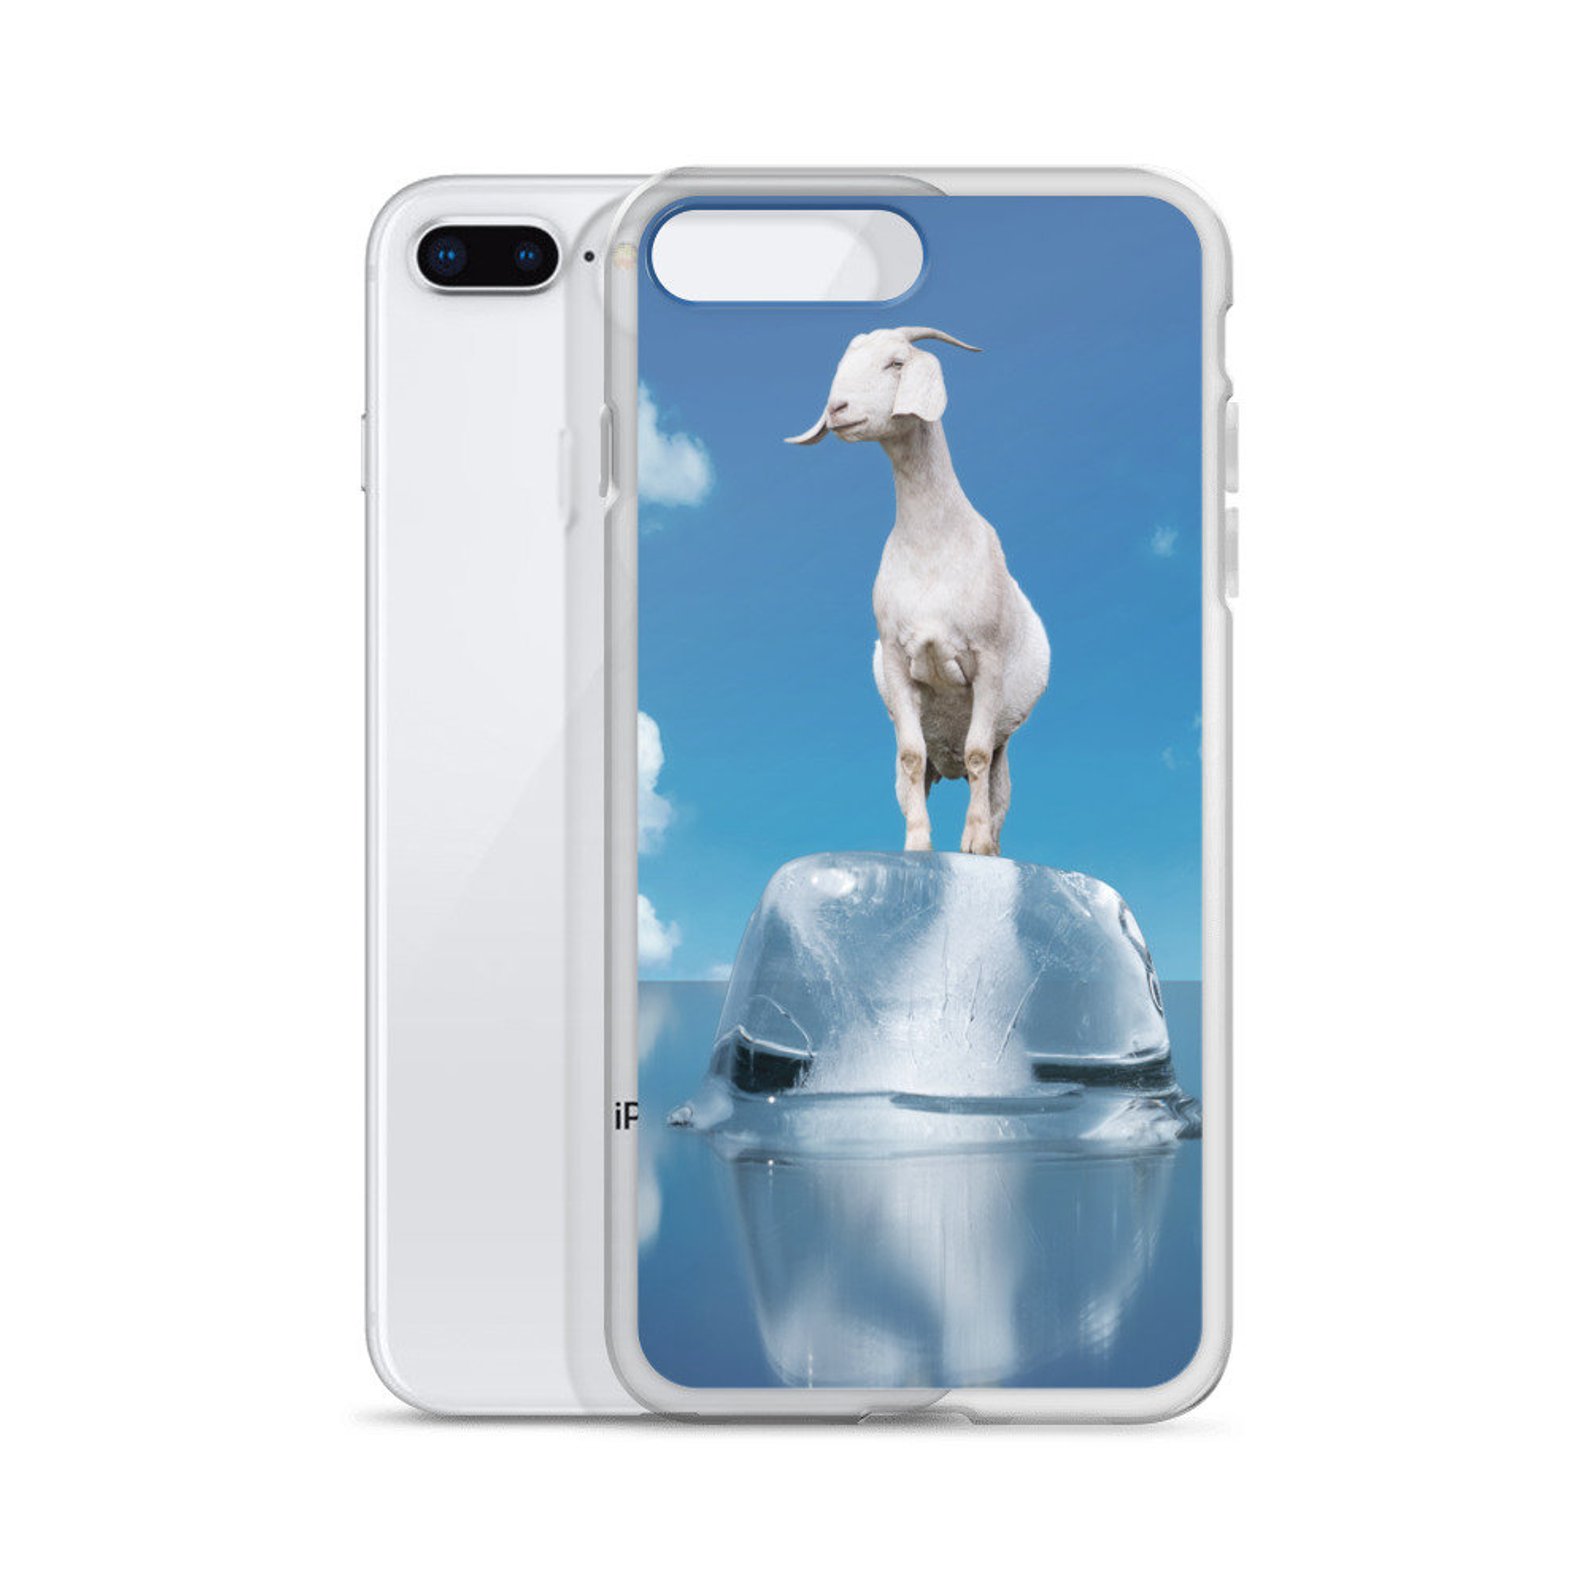 Goat iPhone Case Perpetual Groove